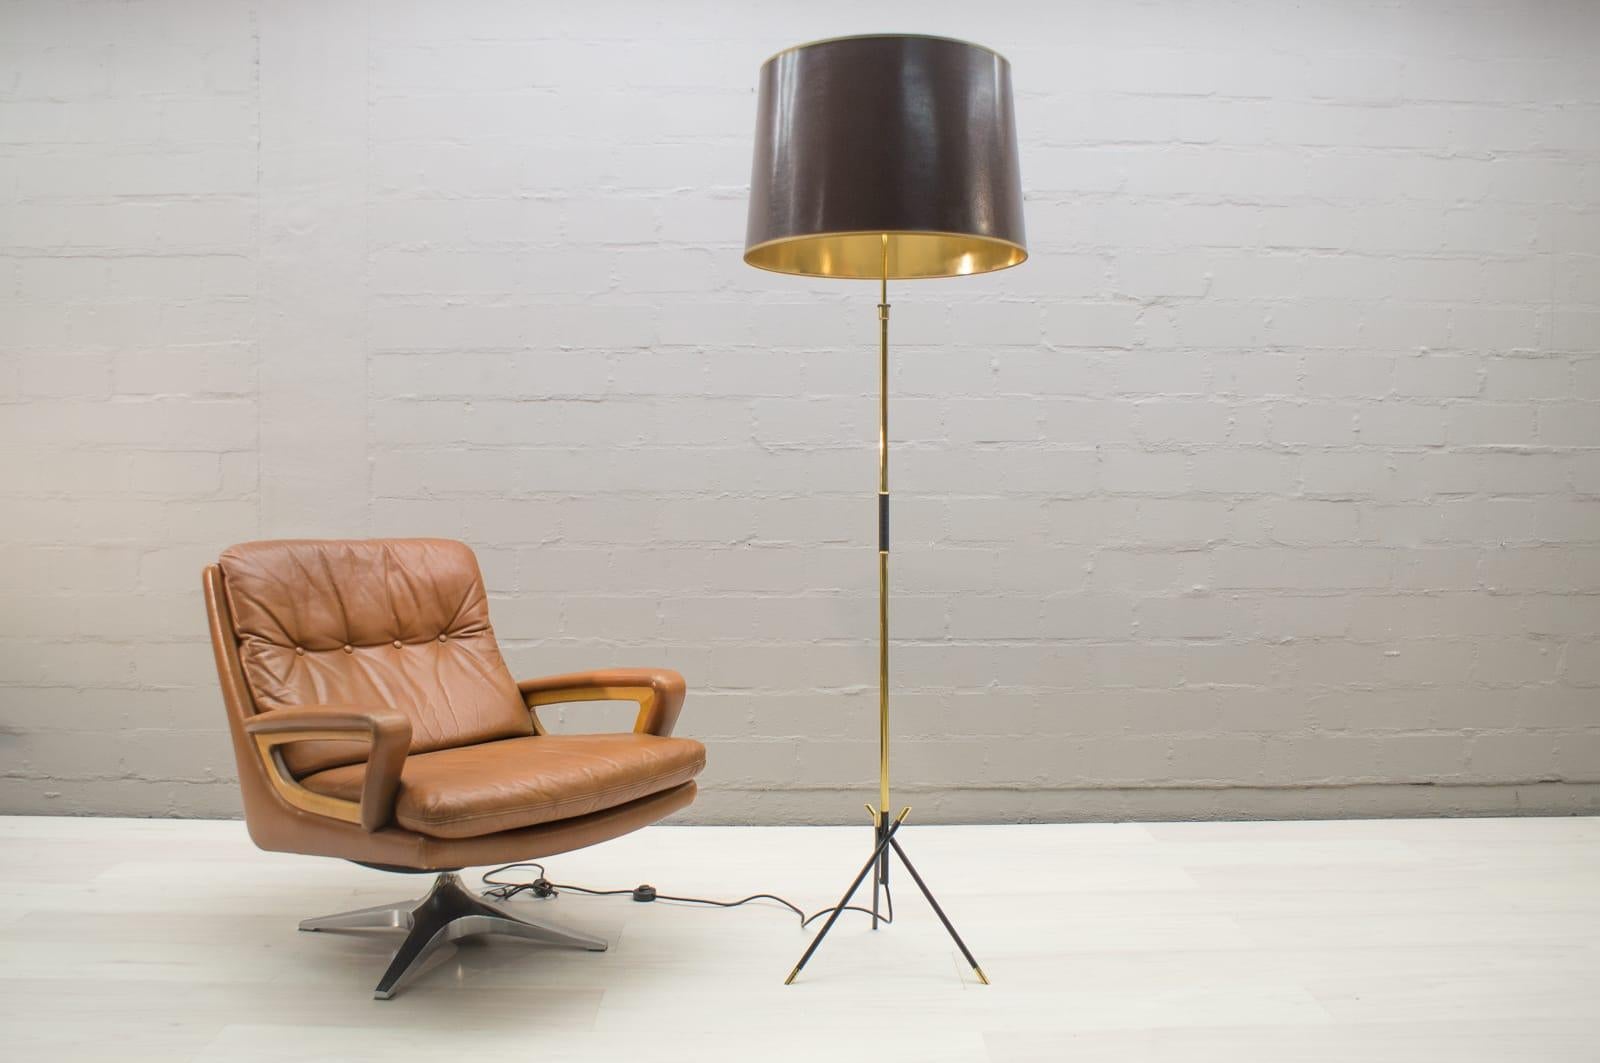 Elegance meets perfection in the lightness of Italian mid-century modern design from the 1950s to the 1960s. 
Height adjustable from 166cm to 176cm. 
Simply beautiful and very decorative. The dimensions of the dark brown lampshade with the golden